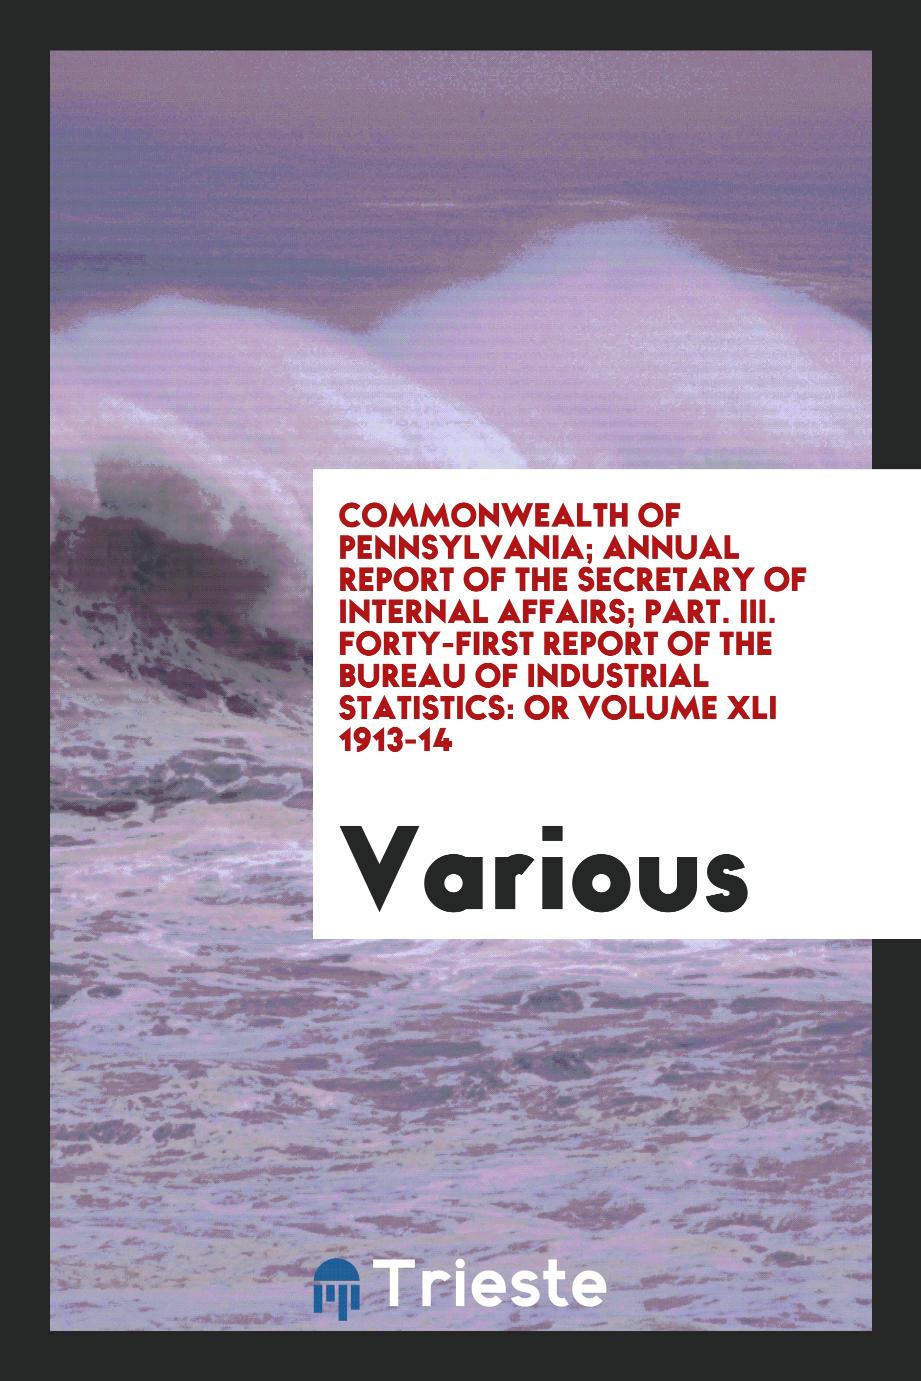 Commonwealth of Pennsylvania; Annual Report of the Secretary of Internal Affairs; Part. III. Forty-First Report of the Bureau of Industrial Statistics: Or Volume XLI 1913-14